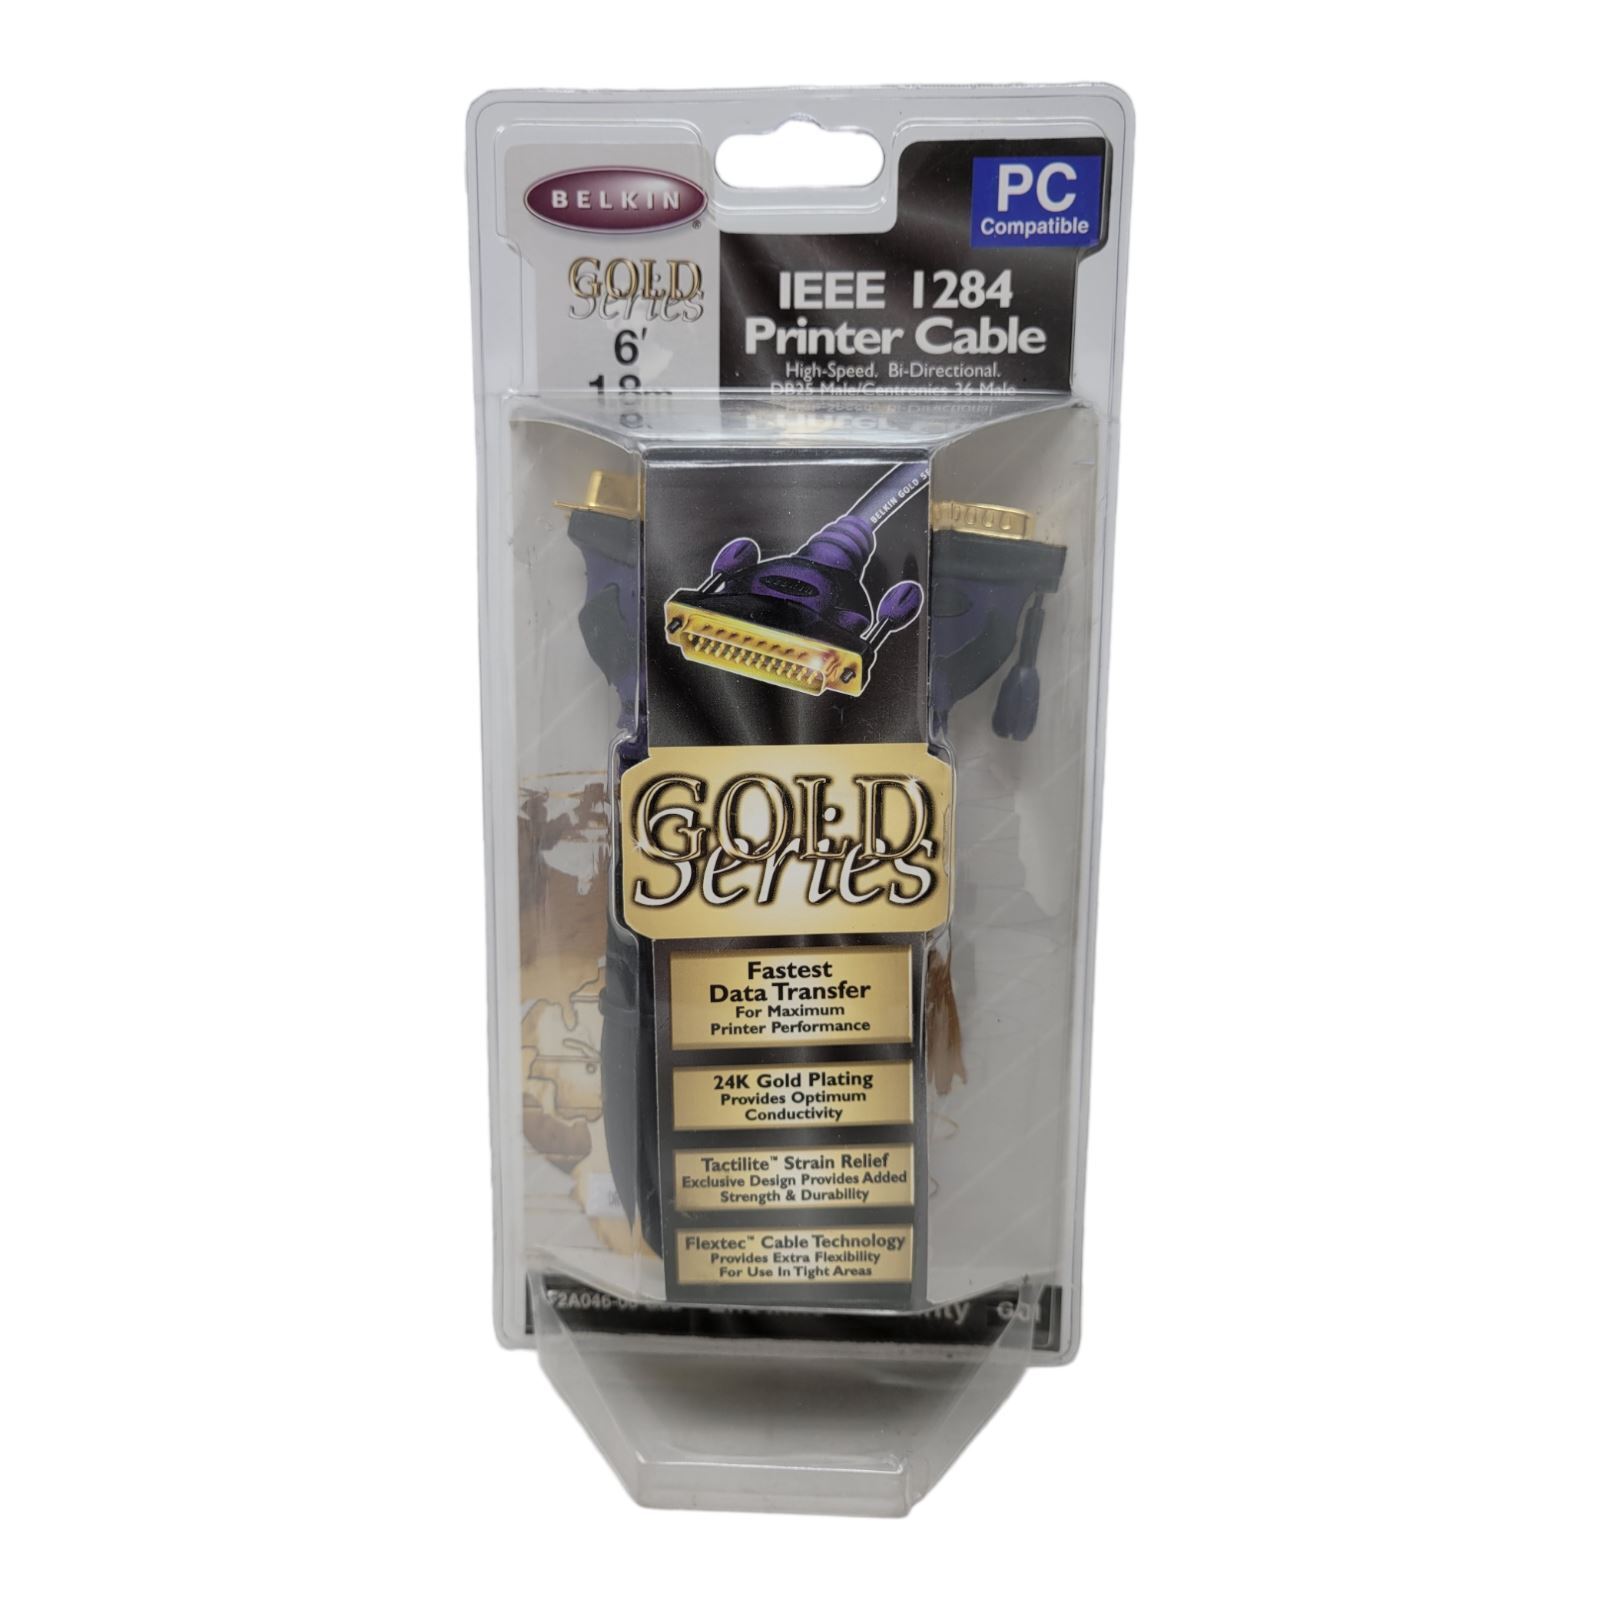 BELKIN IEEE 1284 PRINTER CABLE 6’ FOOT GOLD-SERIES F2A046-06-GLD SEALED NEW